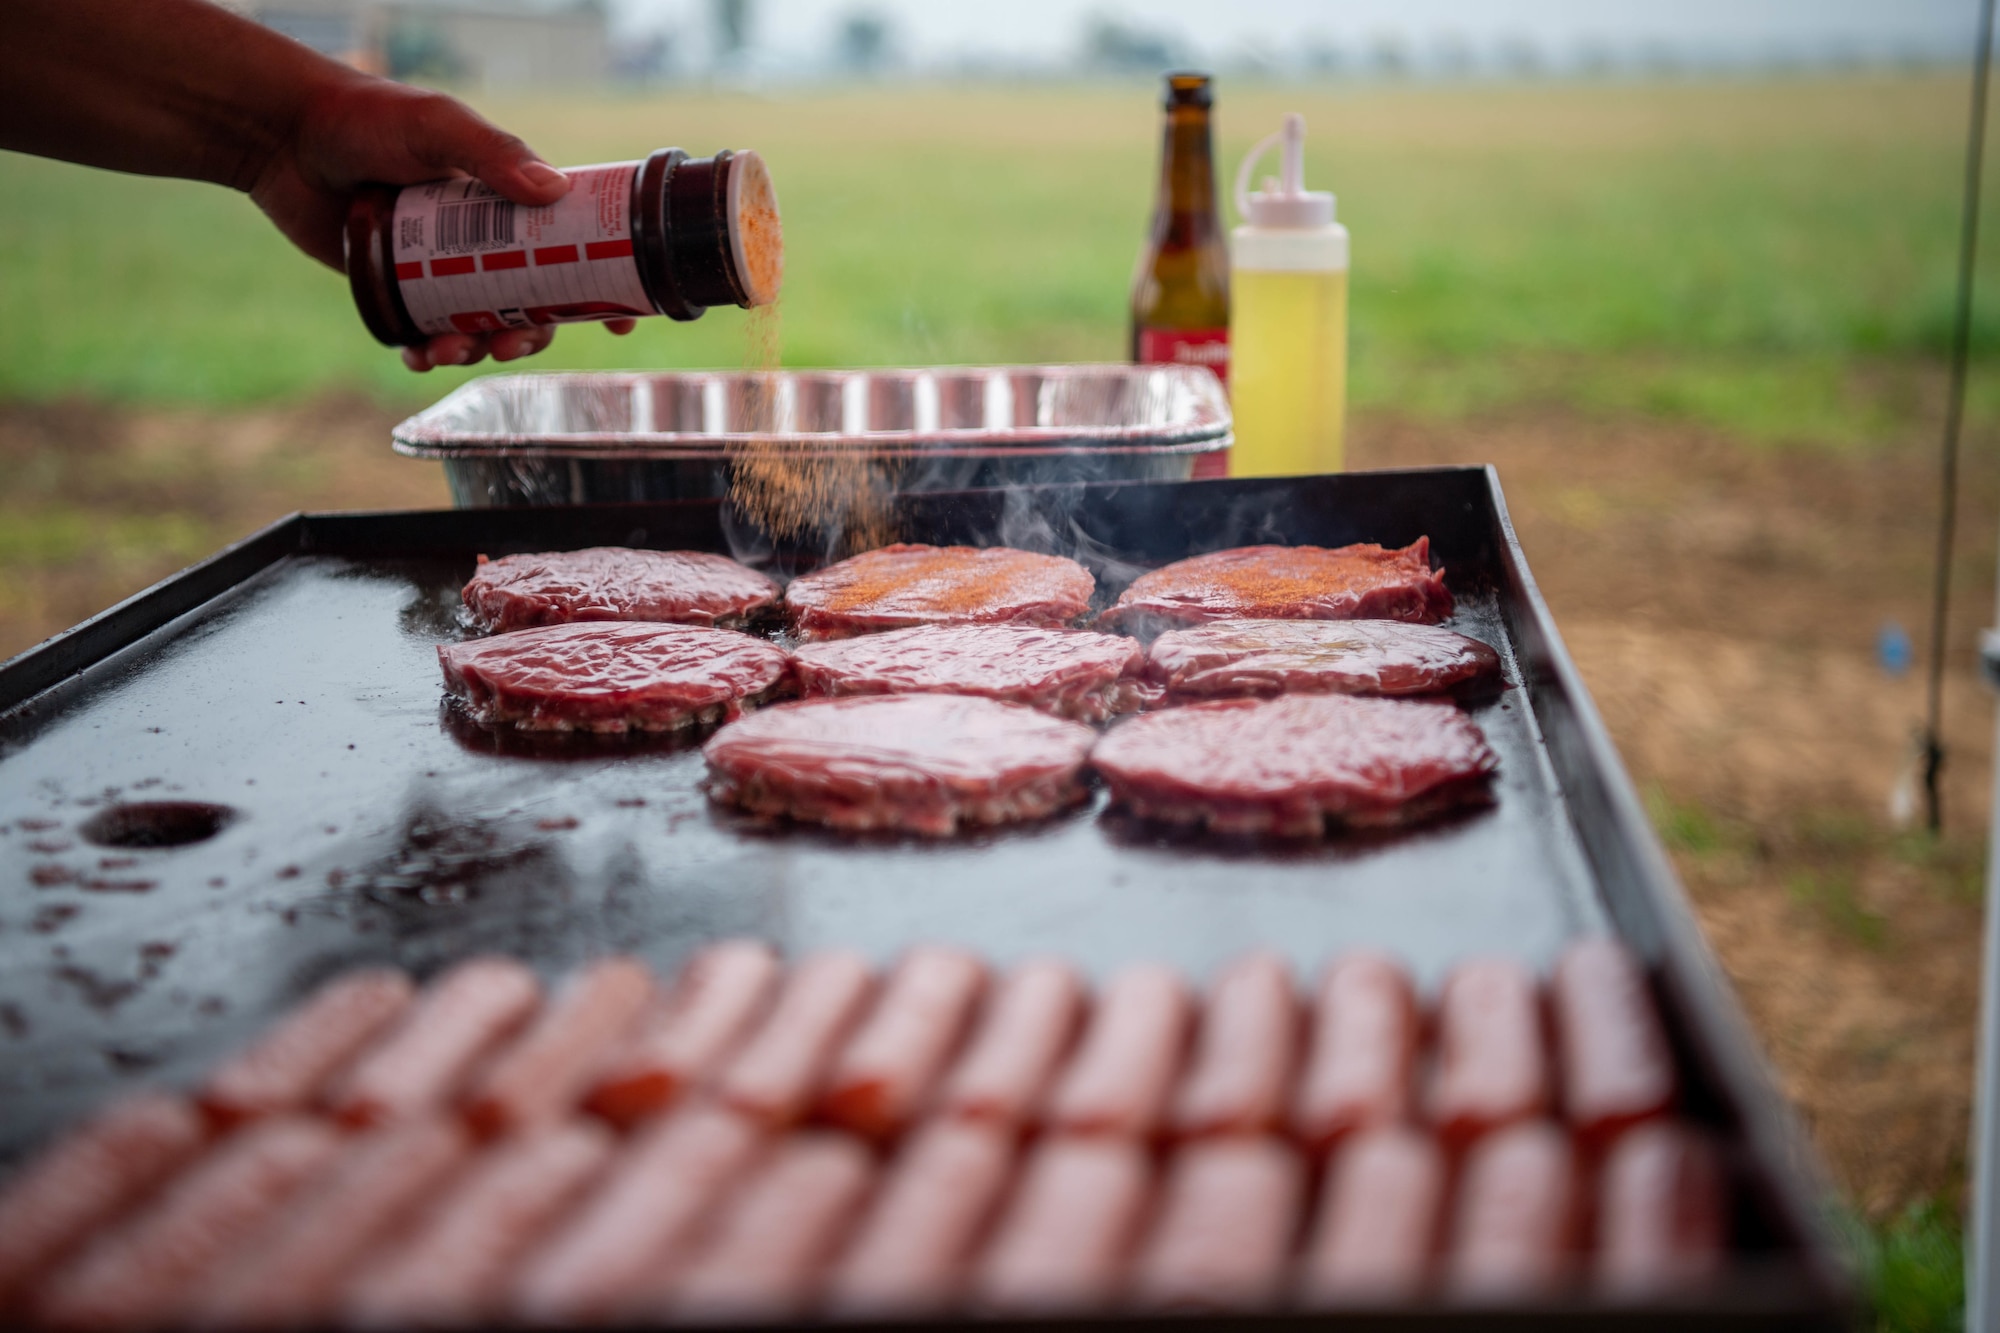 Burgers cook on a grill